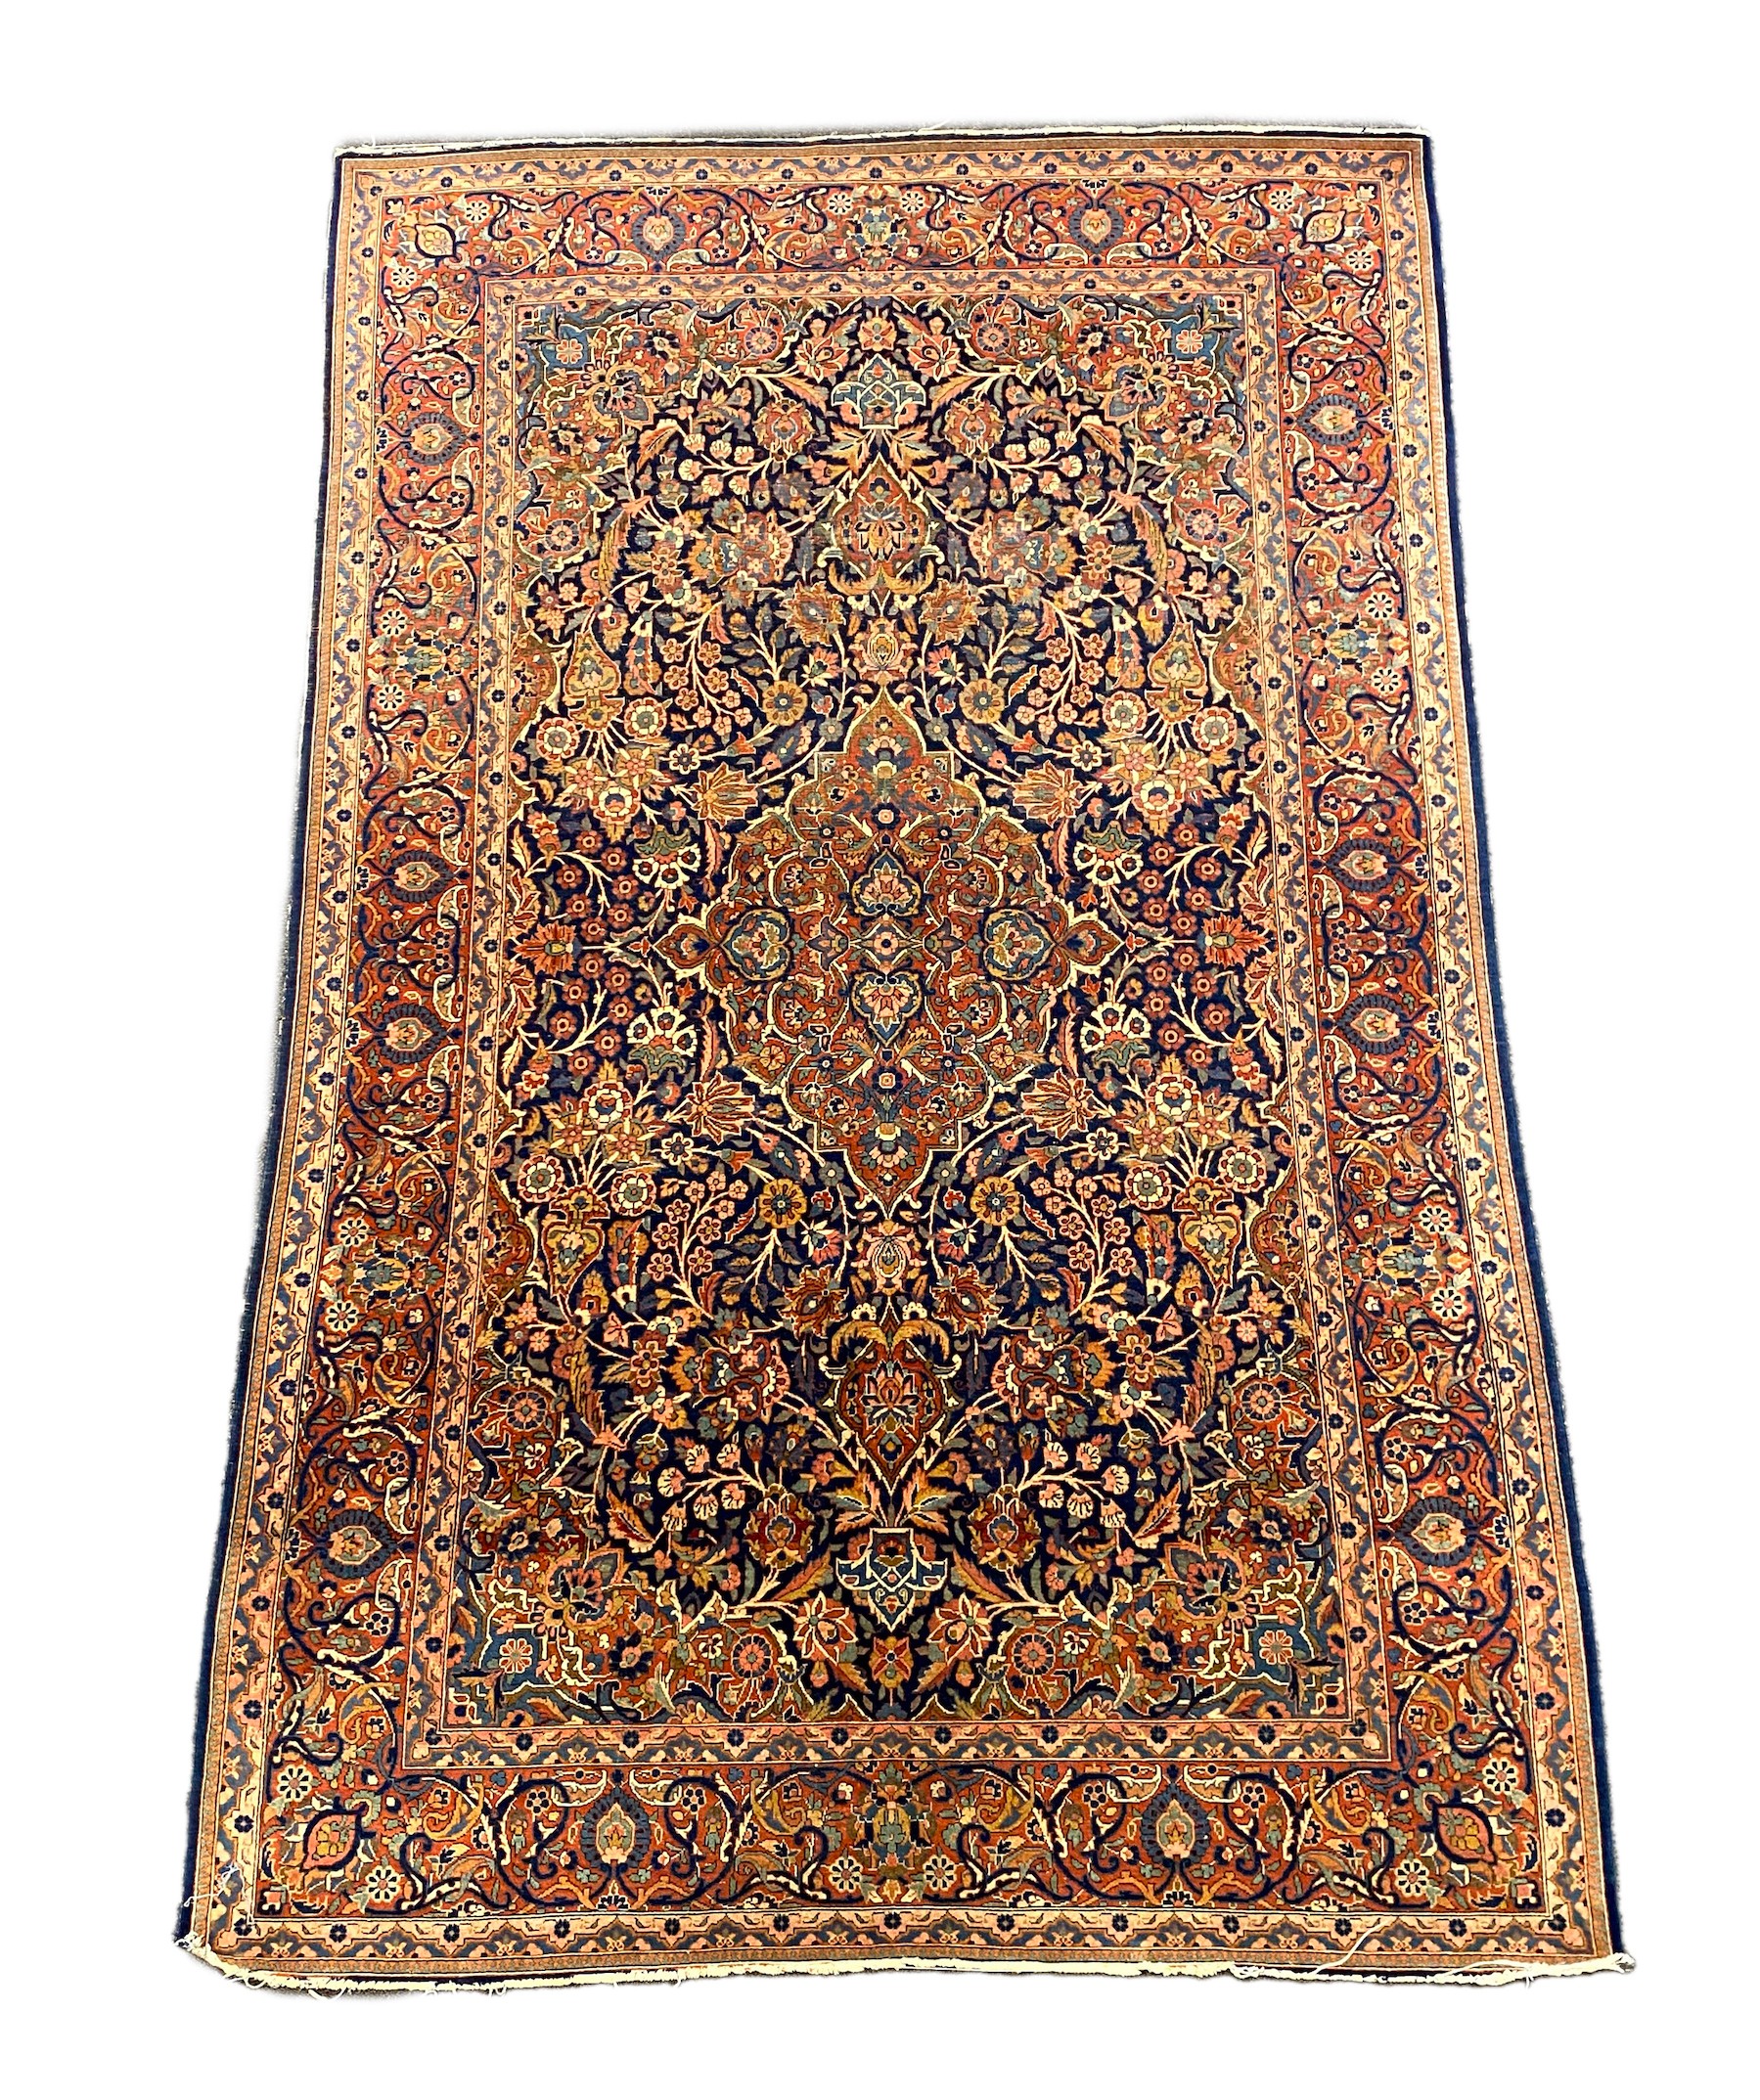 An early 20th century Kashan blue ground rug, with central lobed floral medallion within a triple